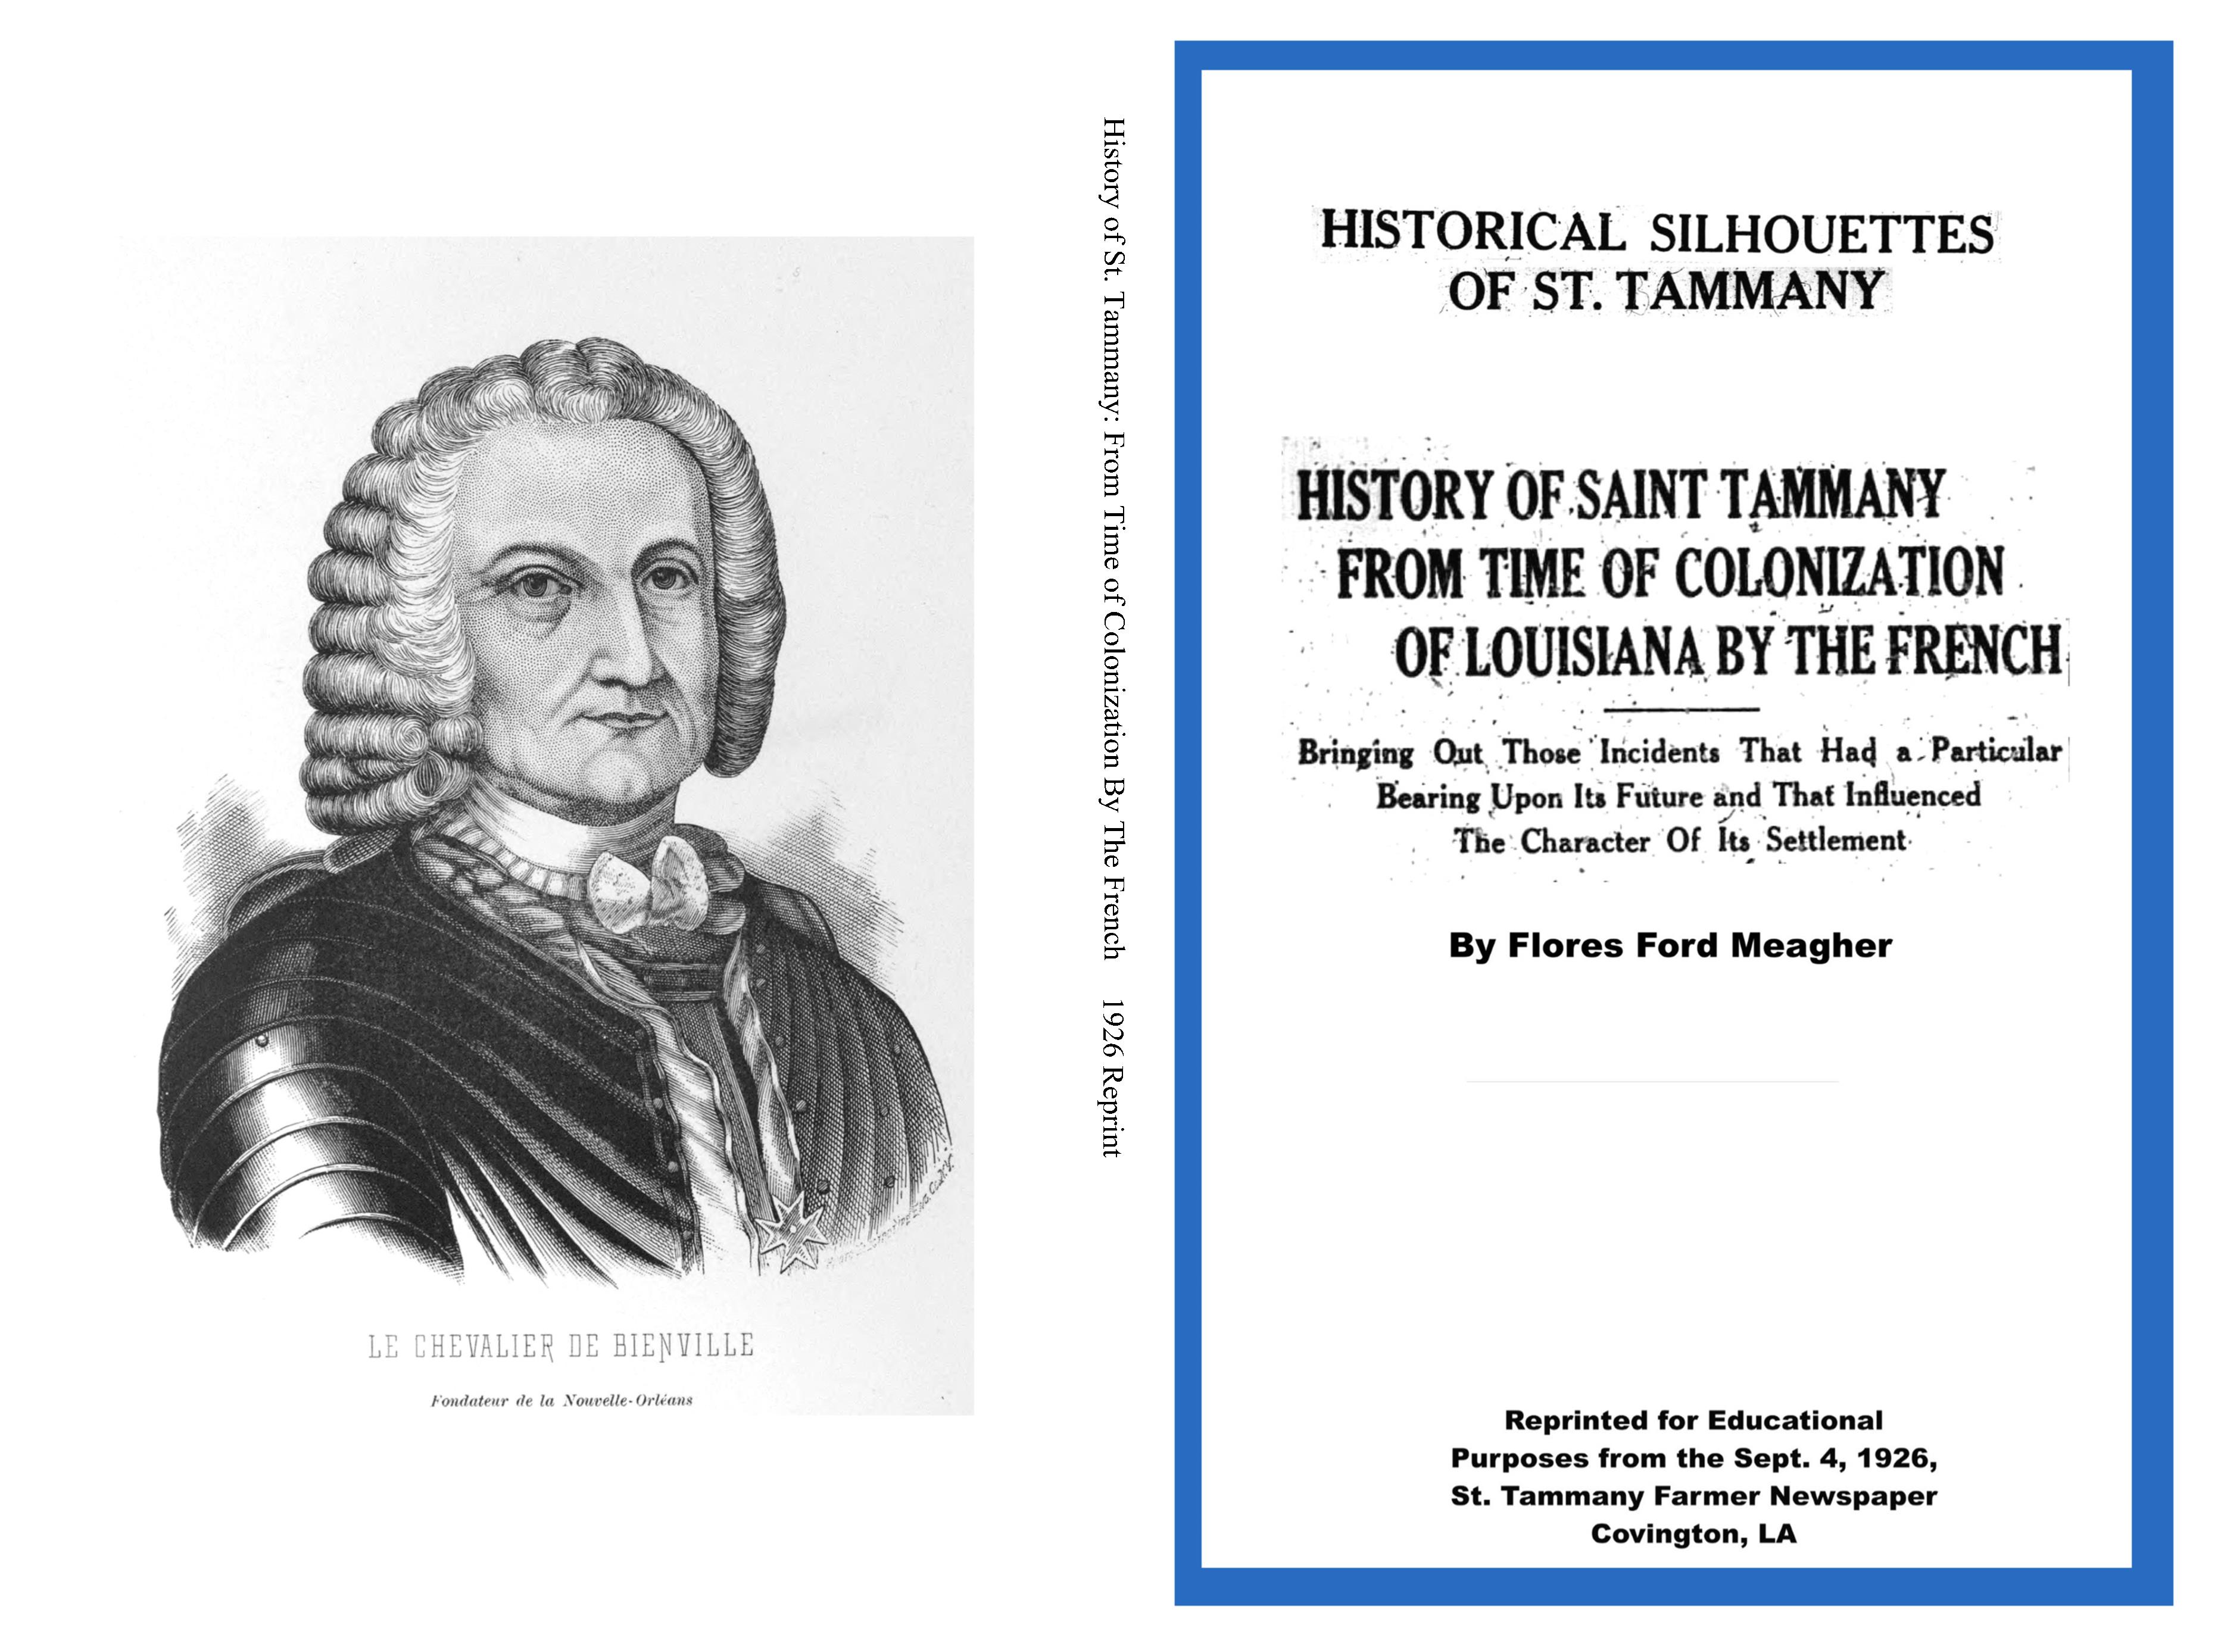 History of St. Tammany: From Time of Colonization By The French cover image